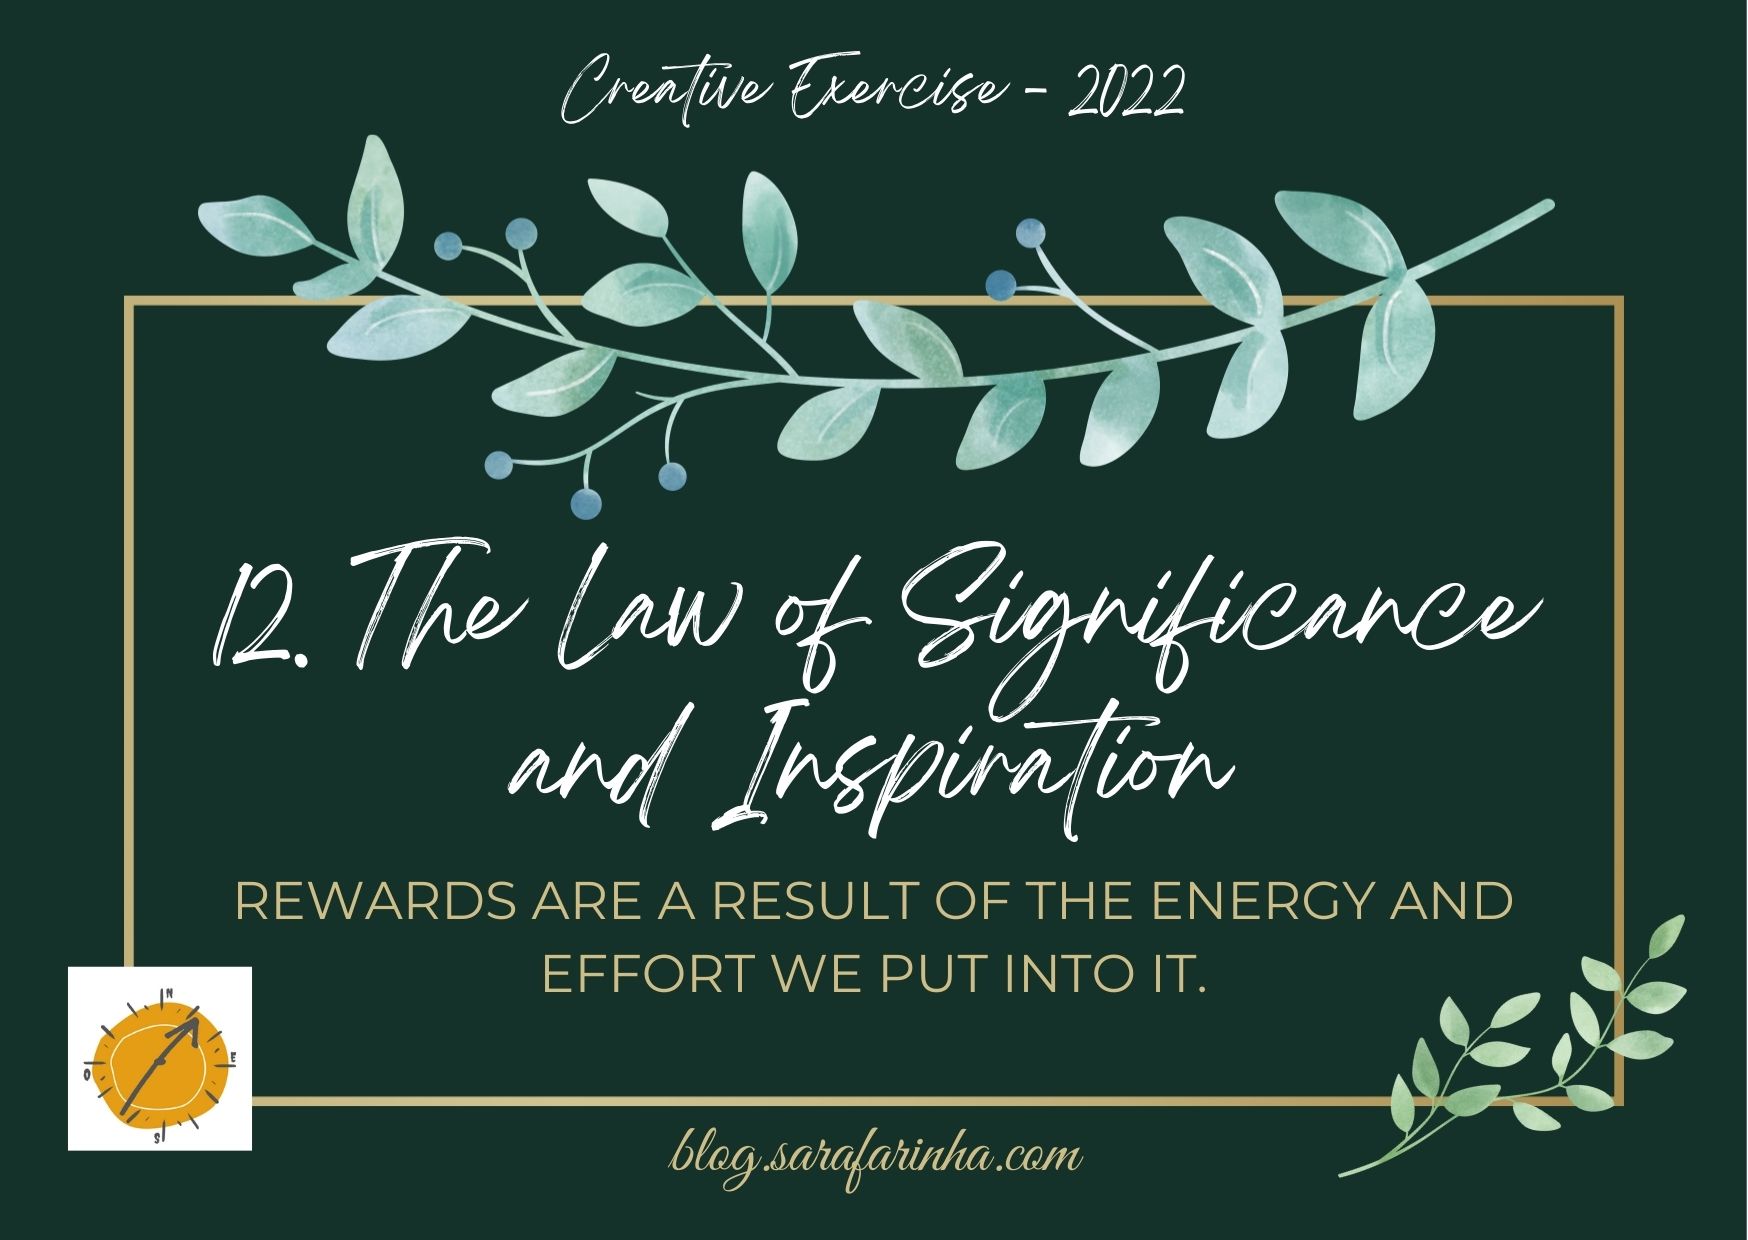 law of significance and inspiration